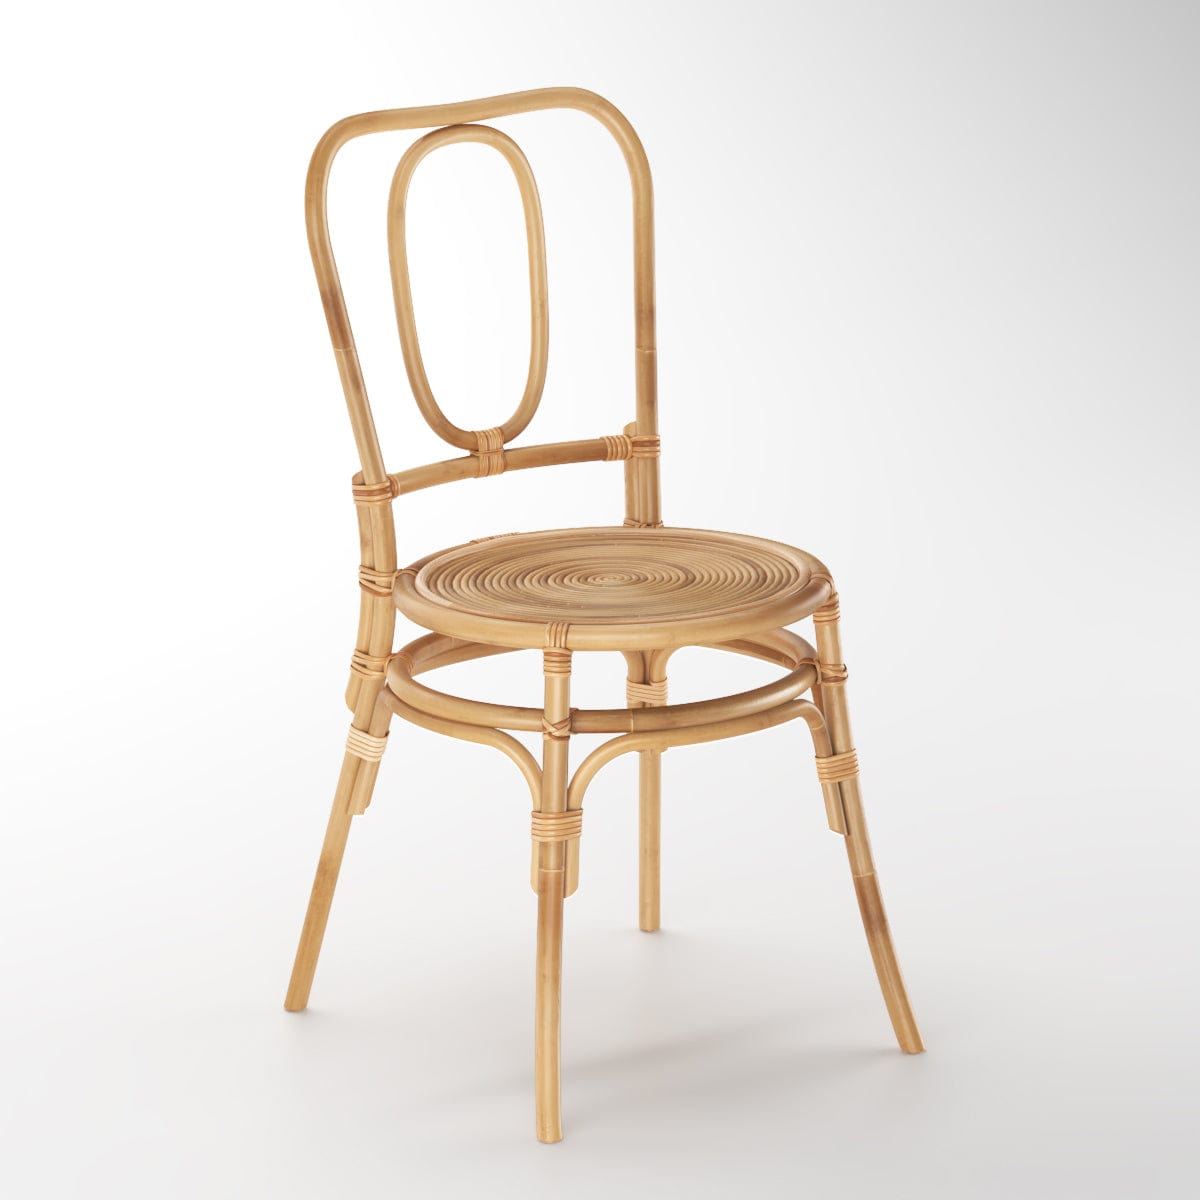 SET OF 2 Light Wooden Dining Chair